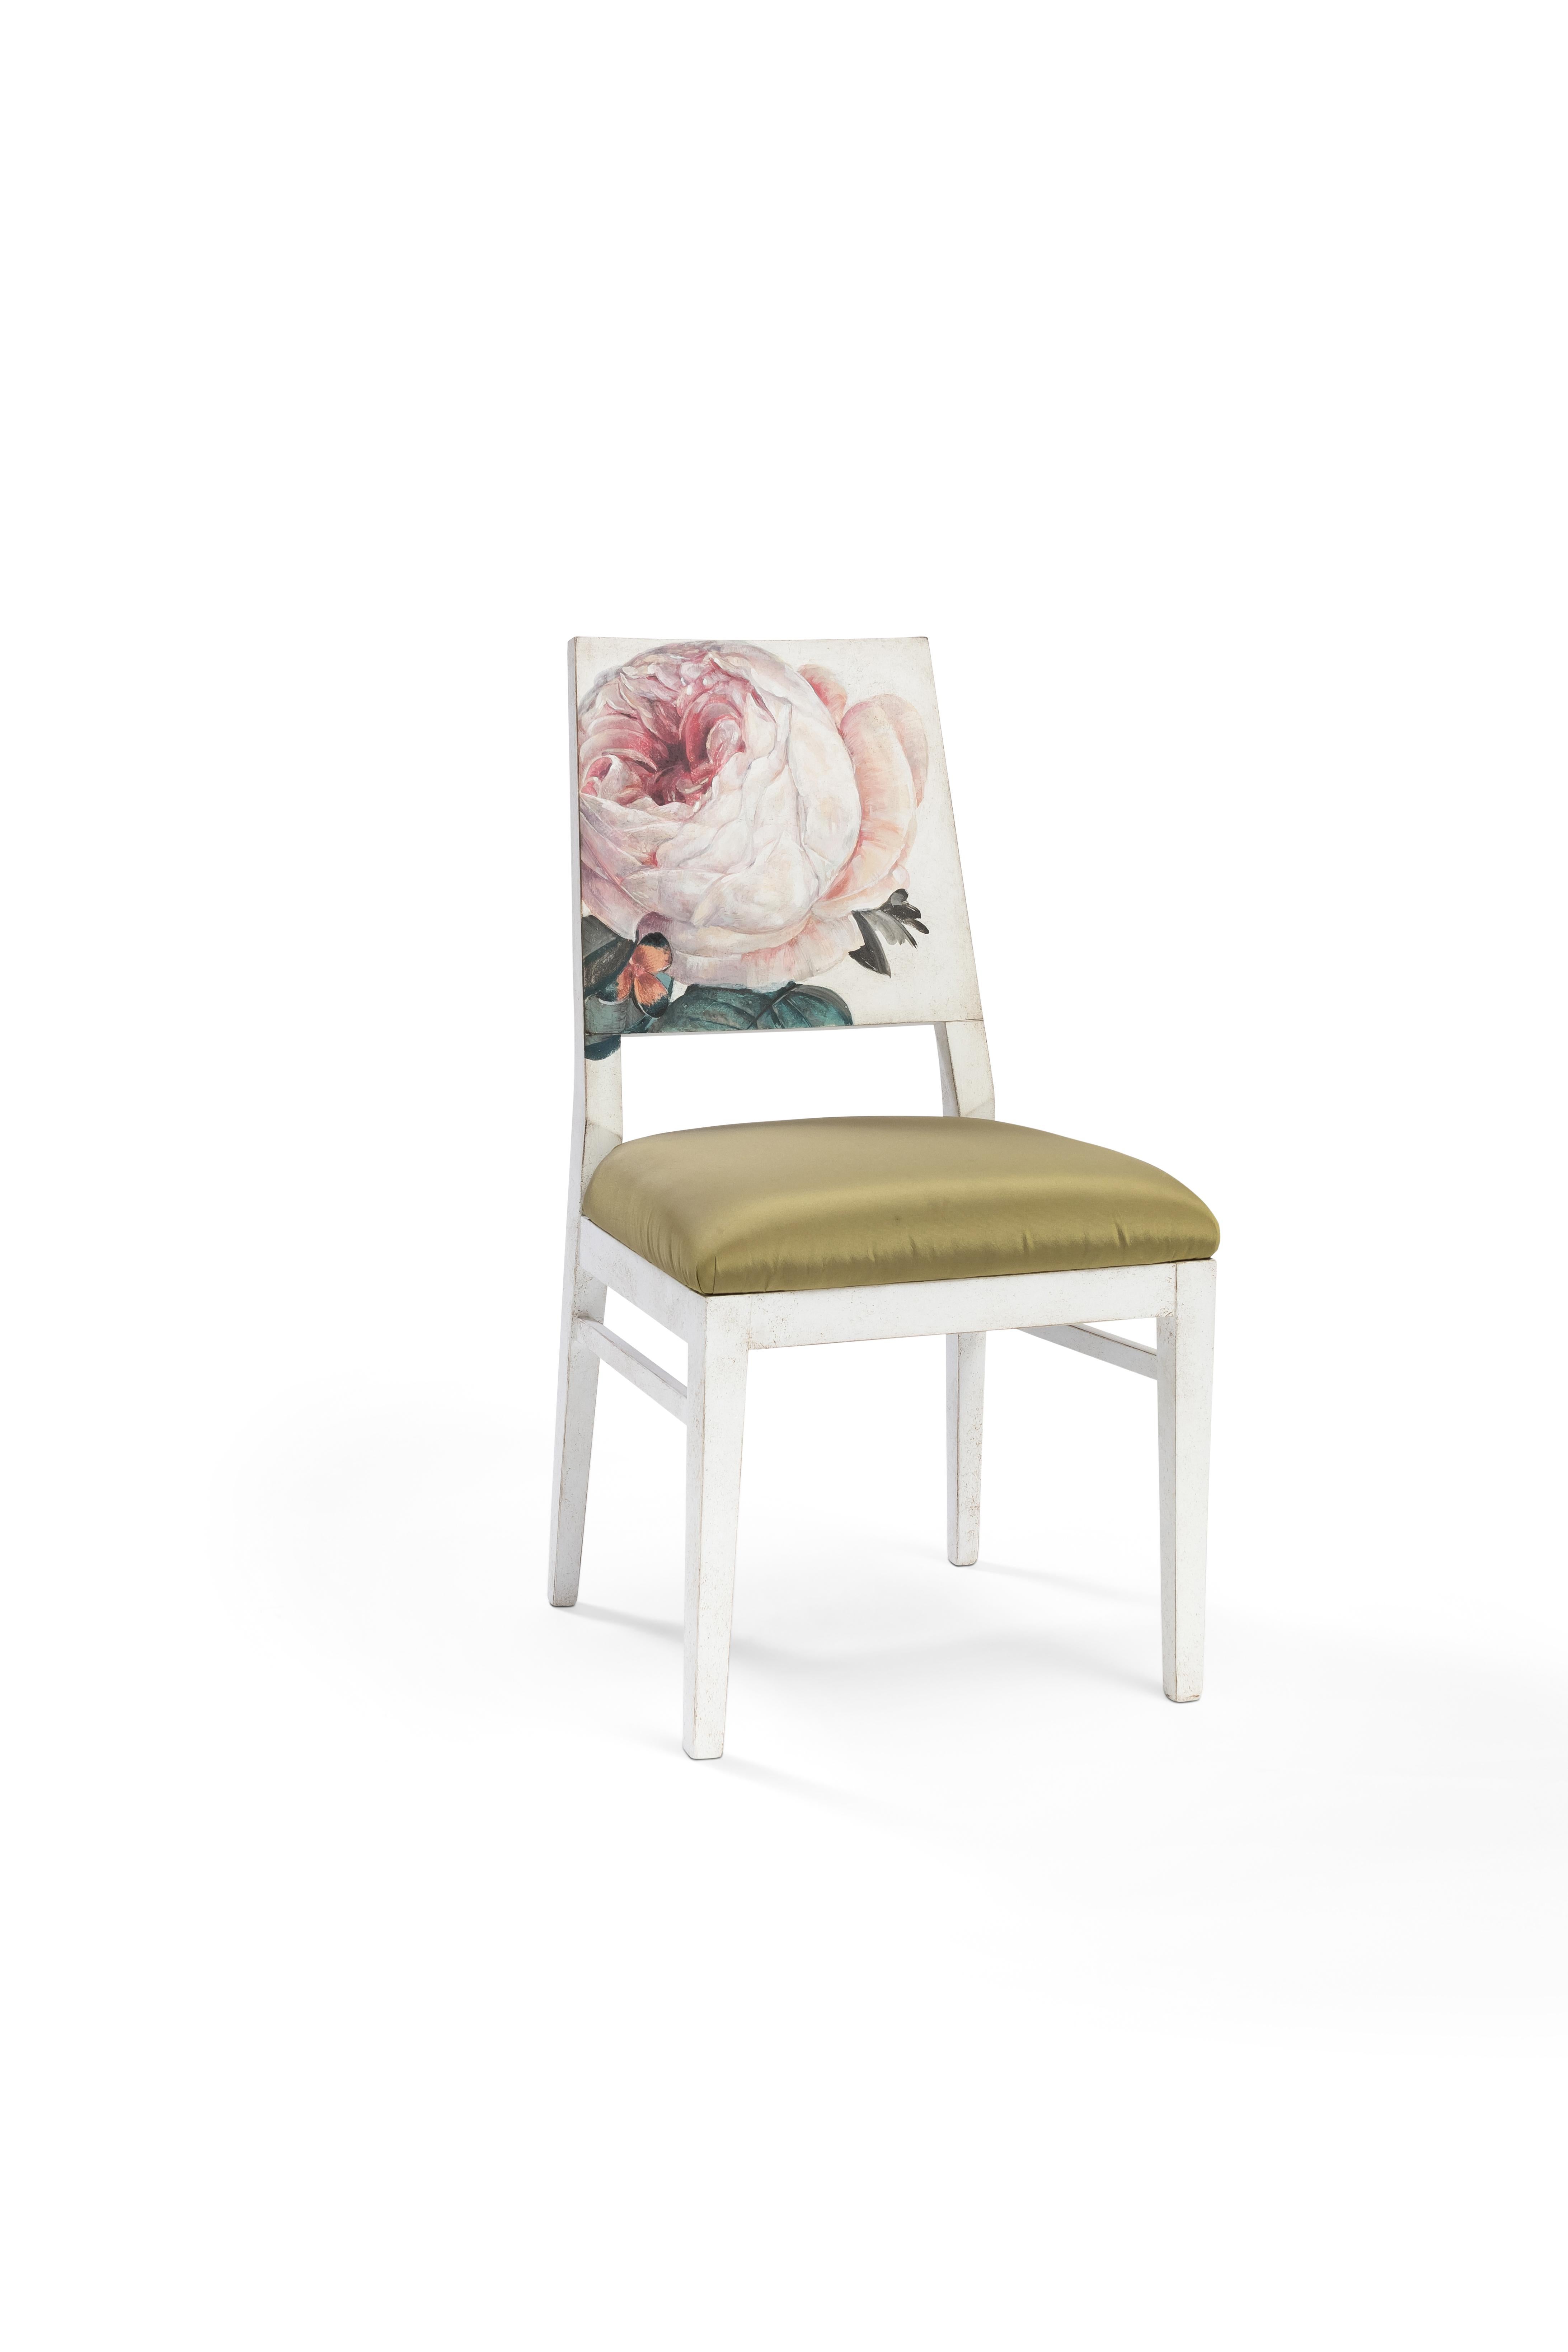 Italian 18th Century Hand Painted Venetian White Indigo Dining Chair with English Rose For Sale